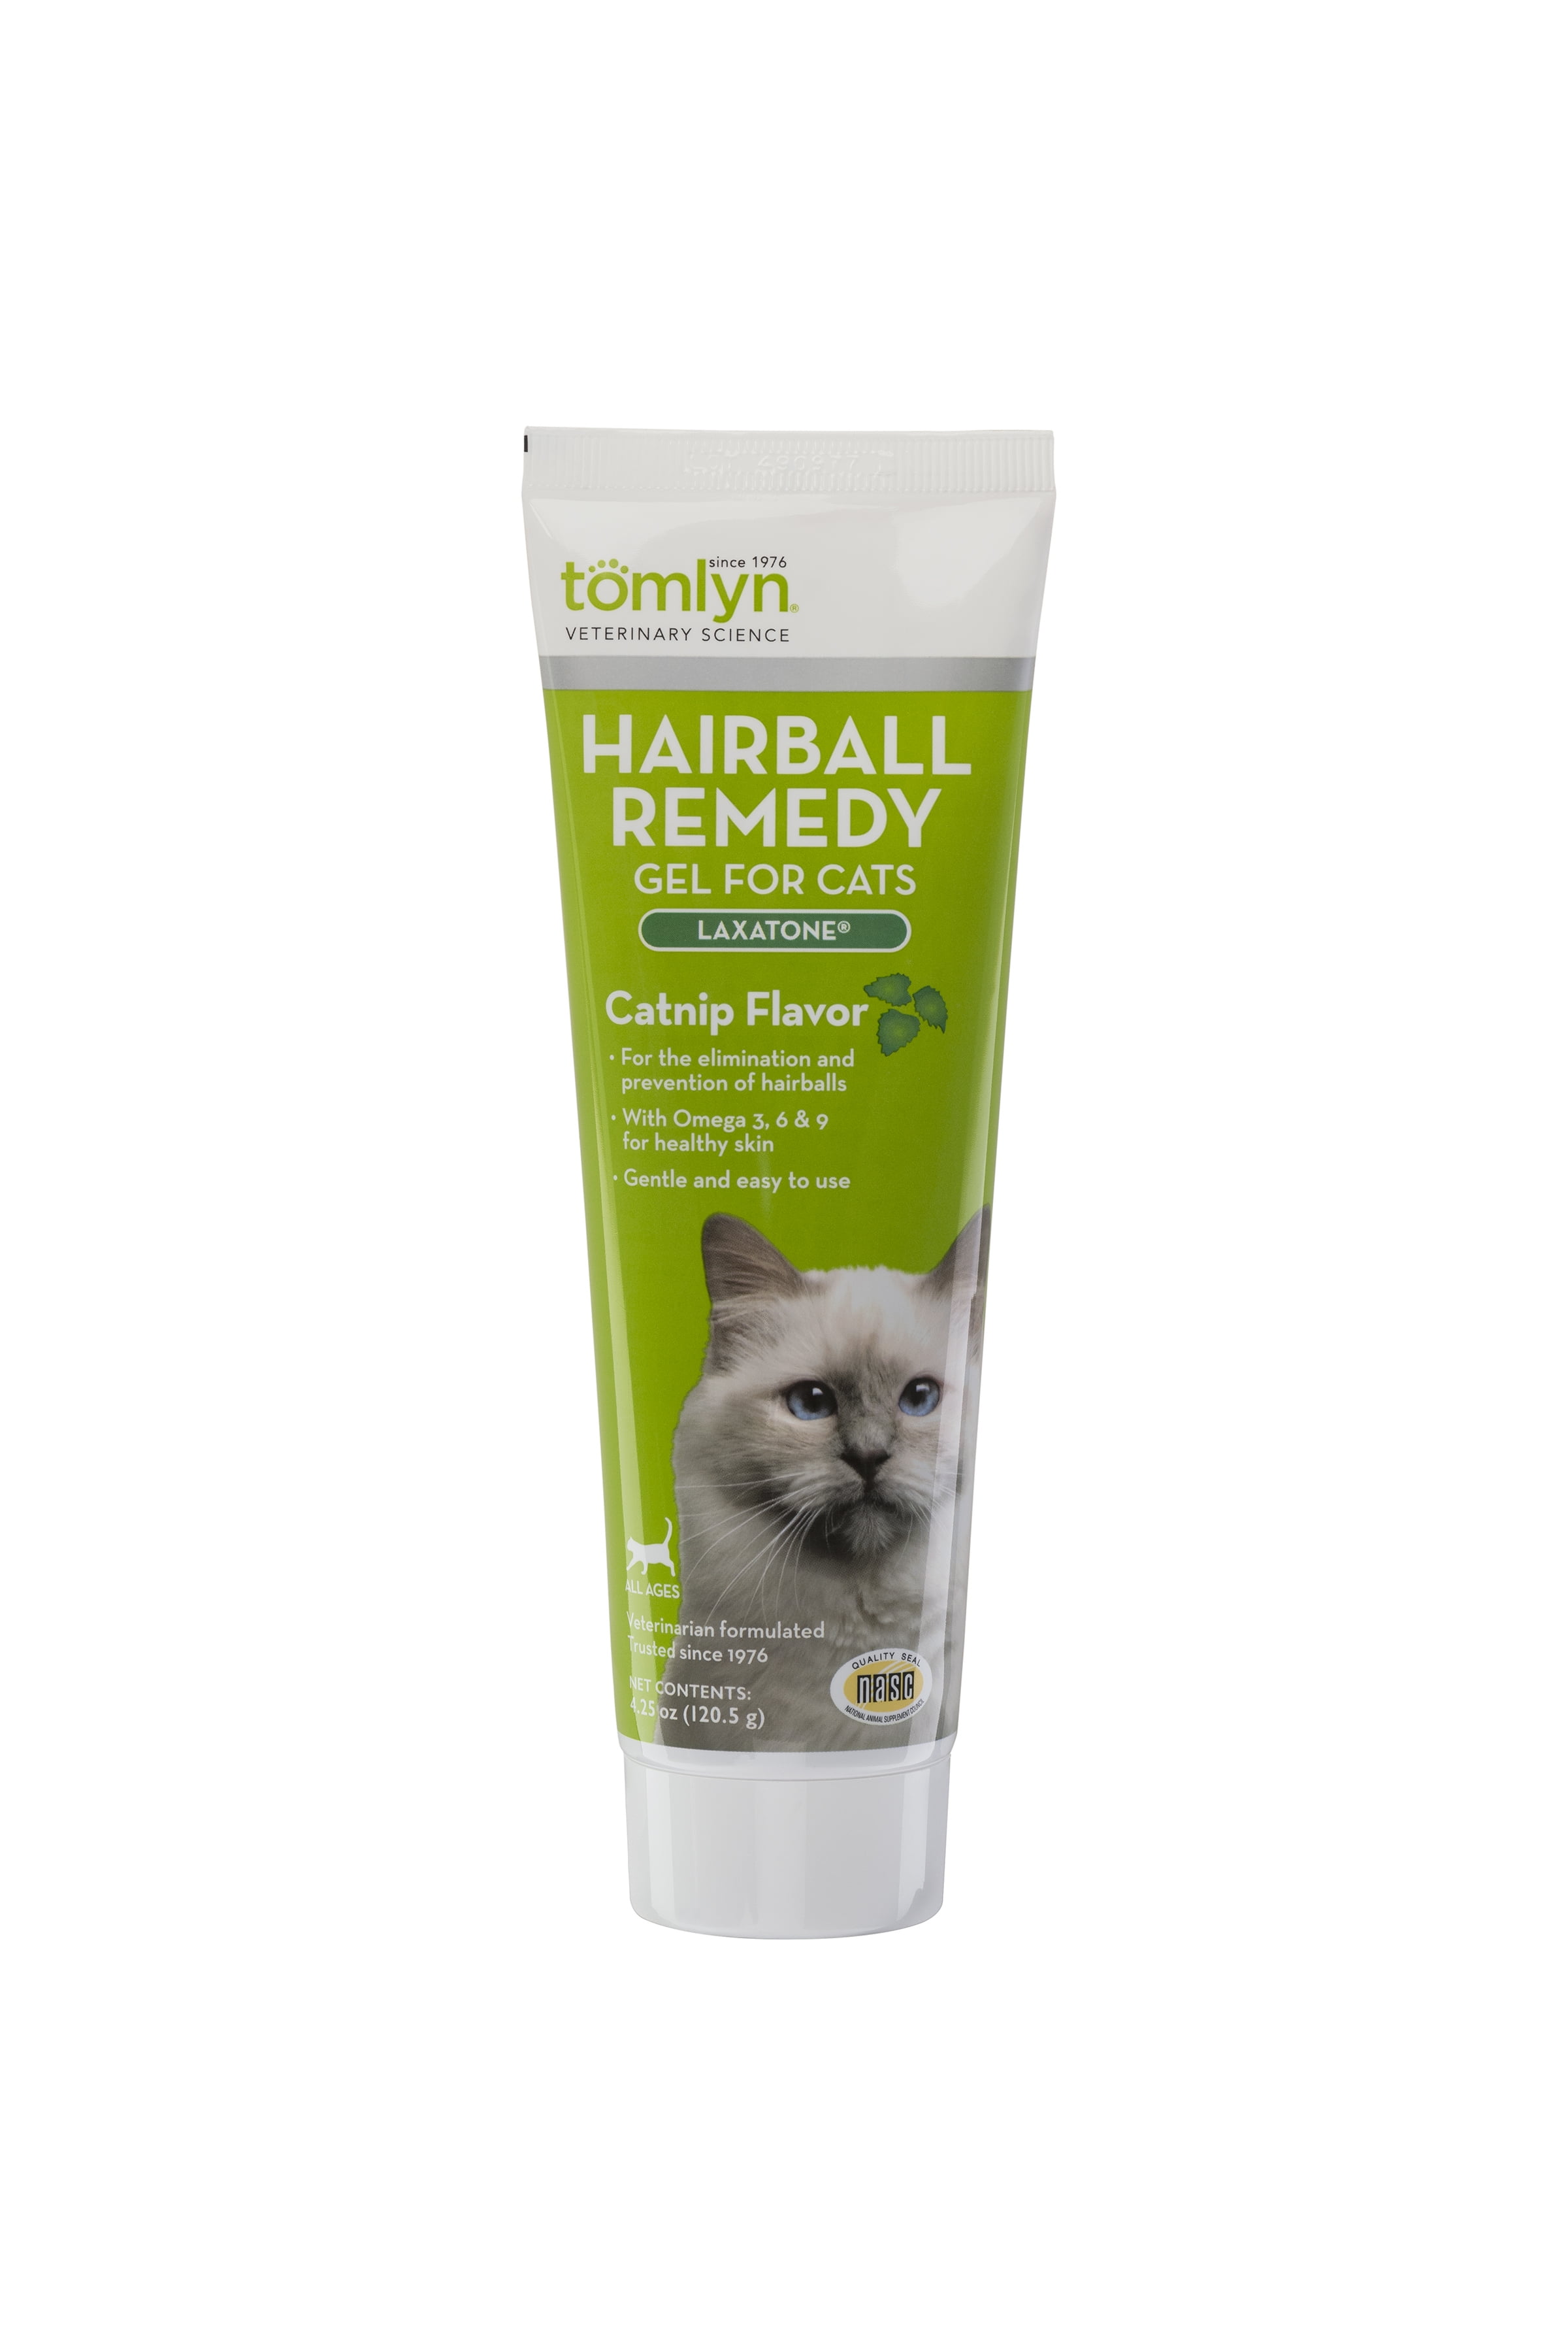 Tomlyn Laxatone Hairball Remedy Supplement for Cats, Catnip Flavor, 4